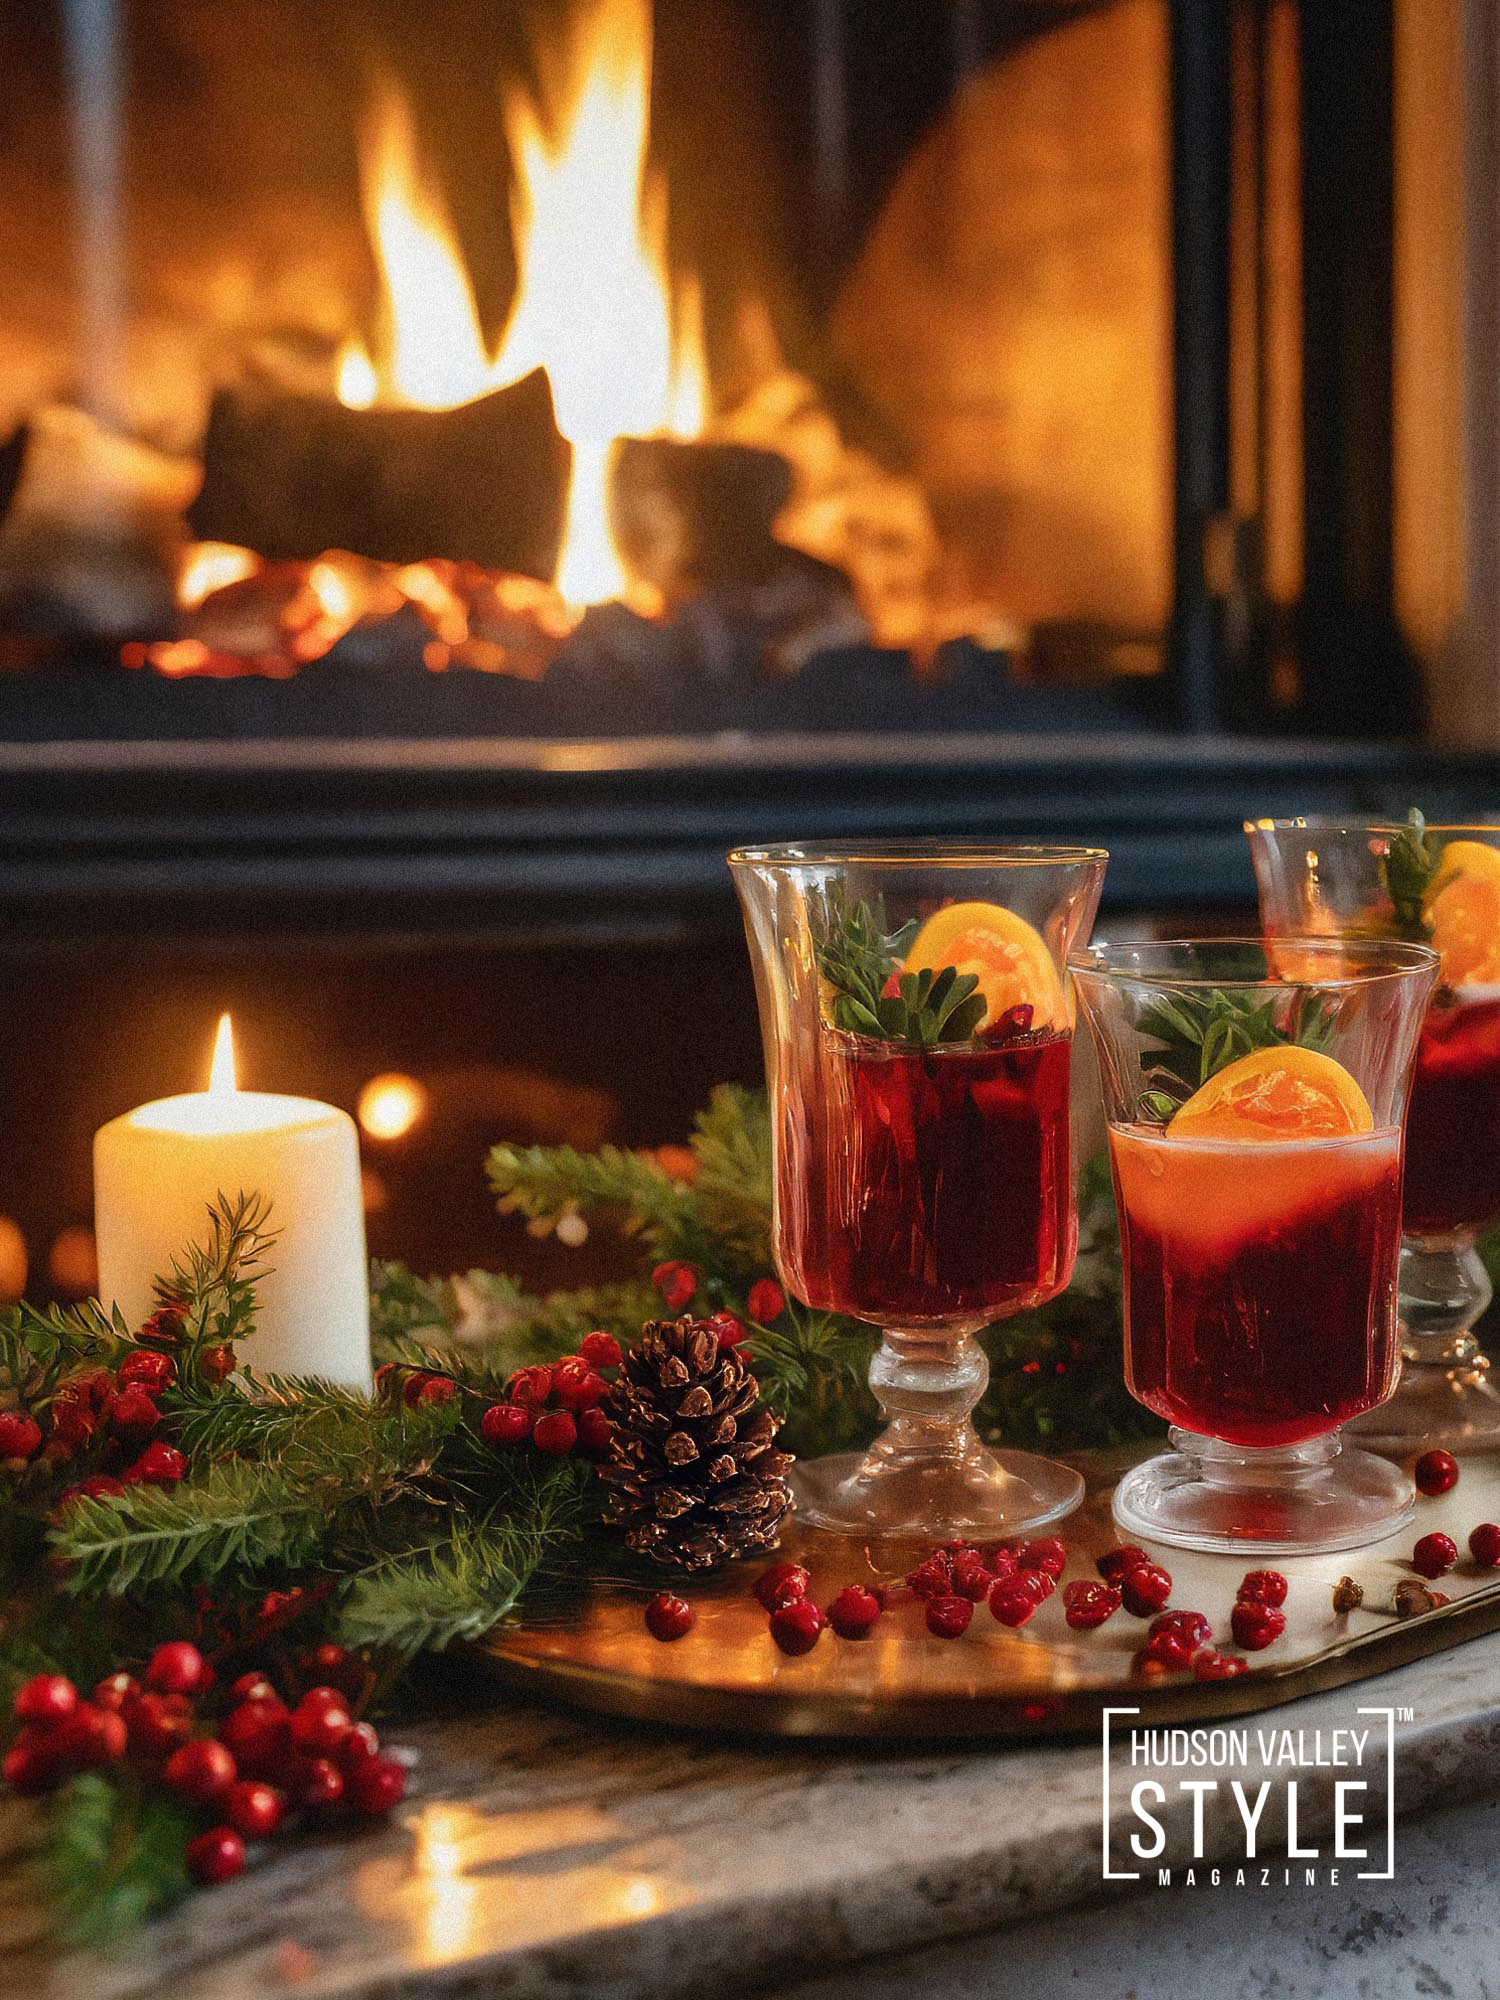 Cozying Up in the Hudson Valley with a Fabulously Healthy Spiced Cranberry-Orange Mocktail – Hudson Valley Style Mixology with Maxwell Alexander – Presented by Alluvion Vacations